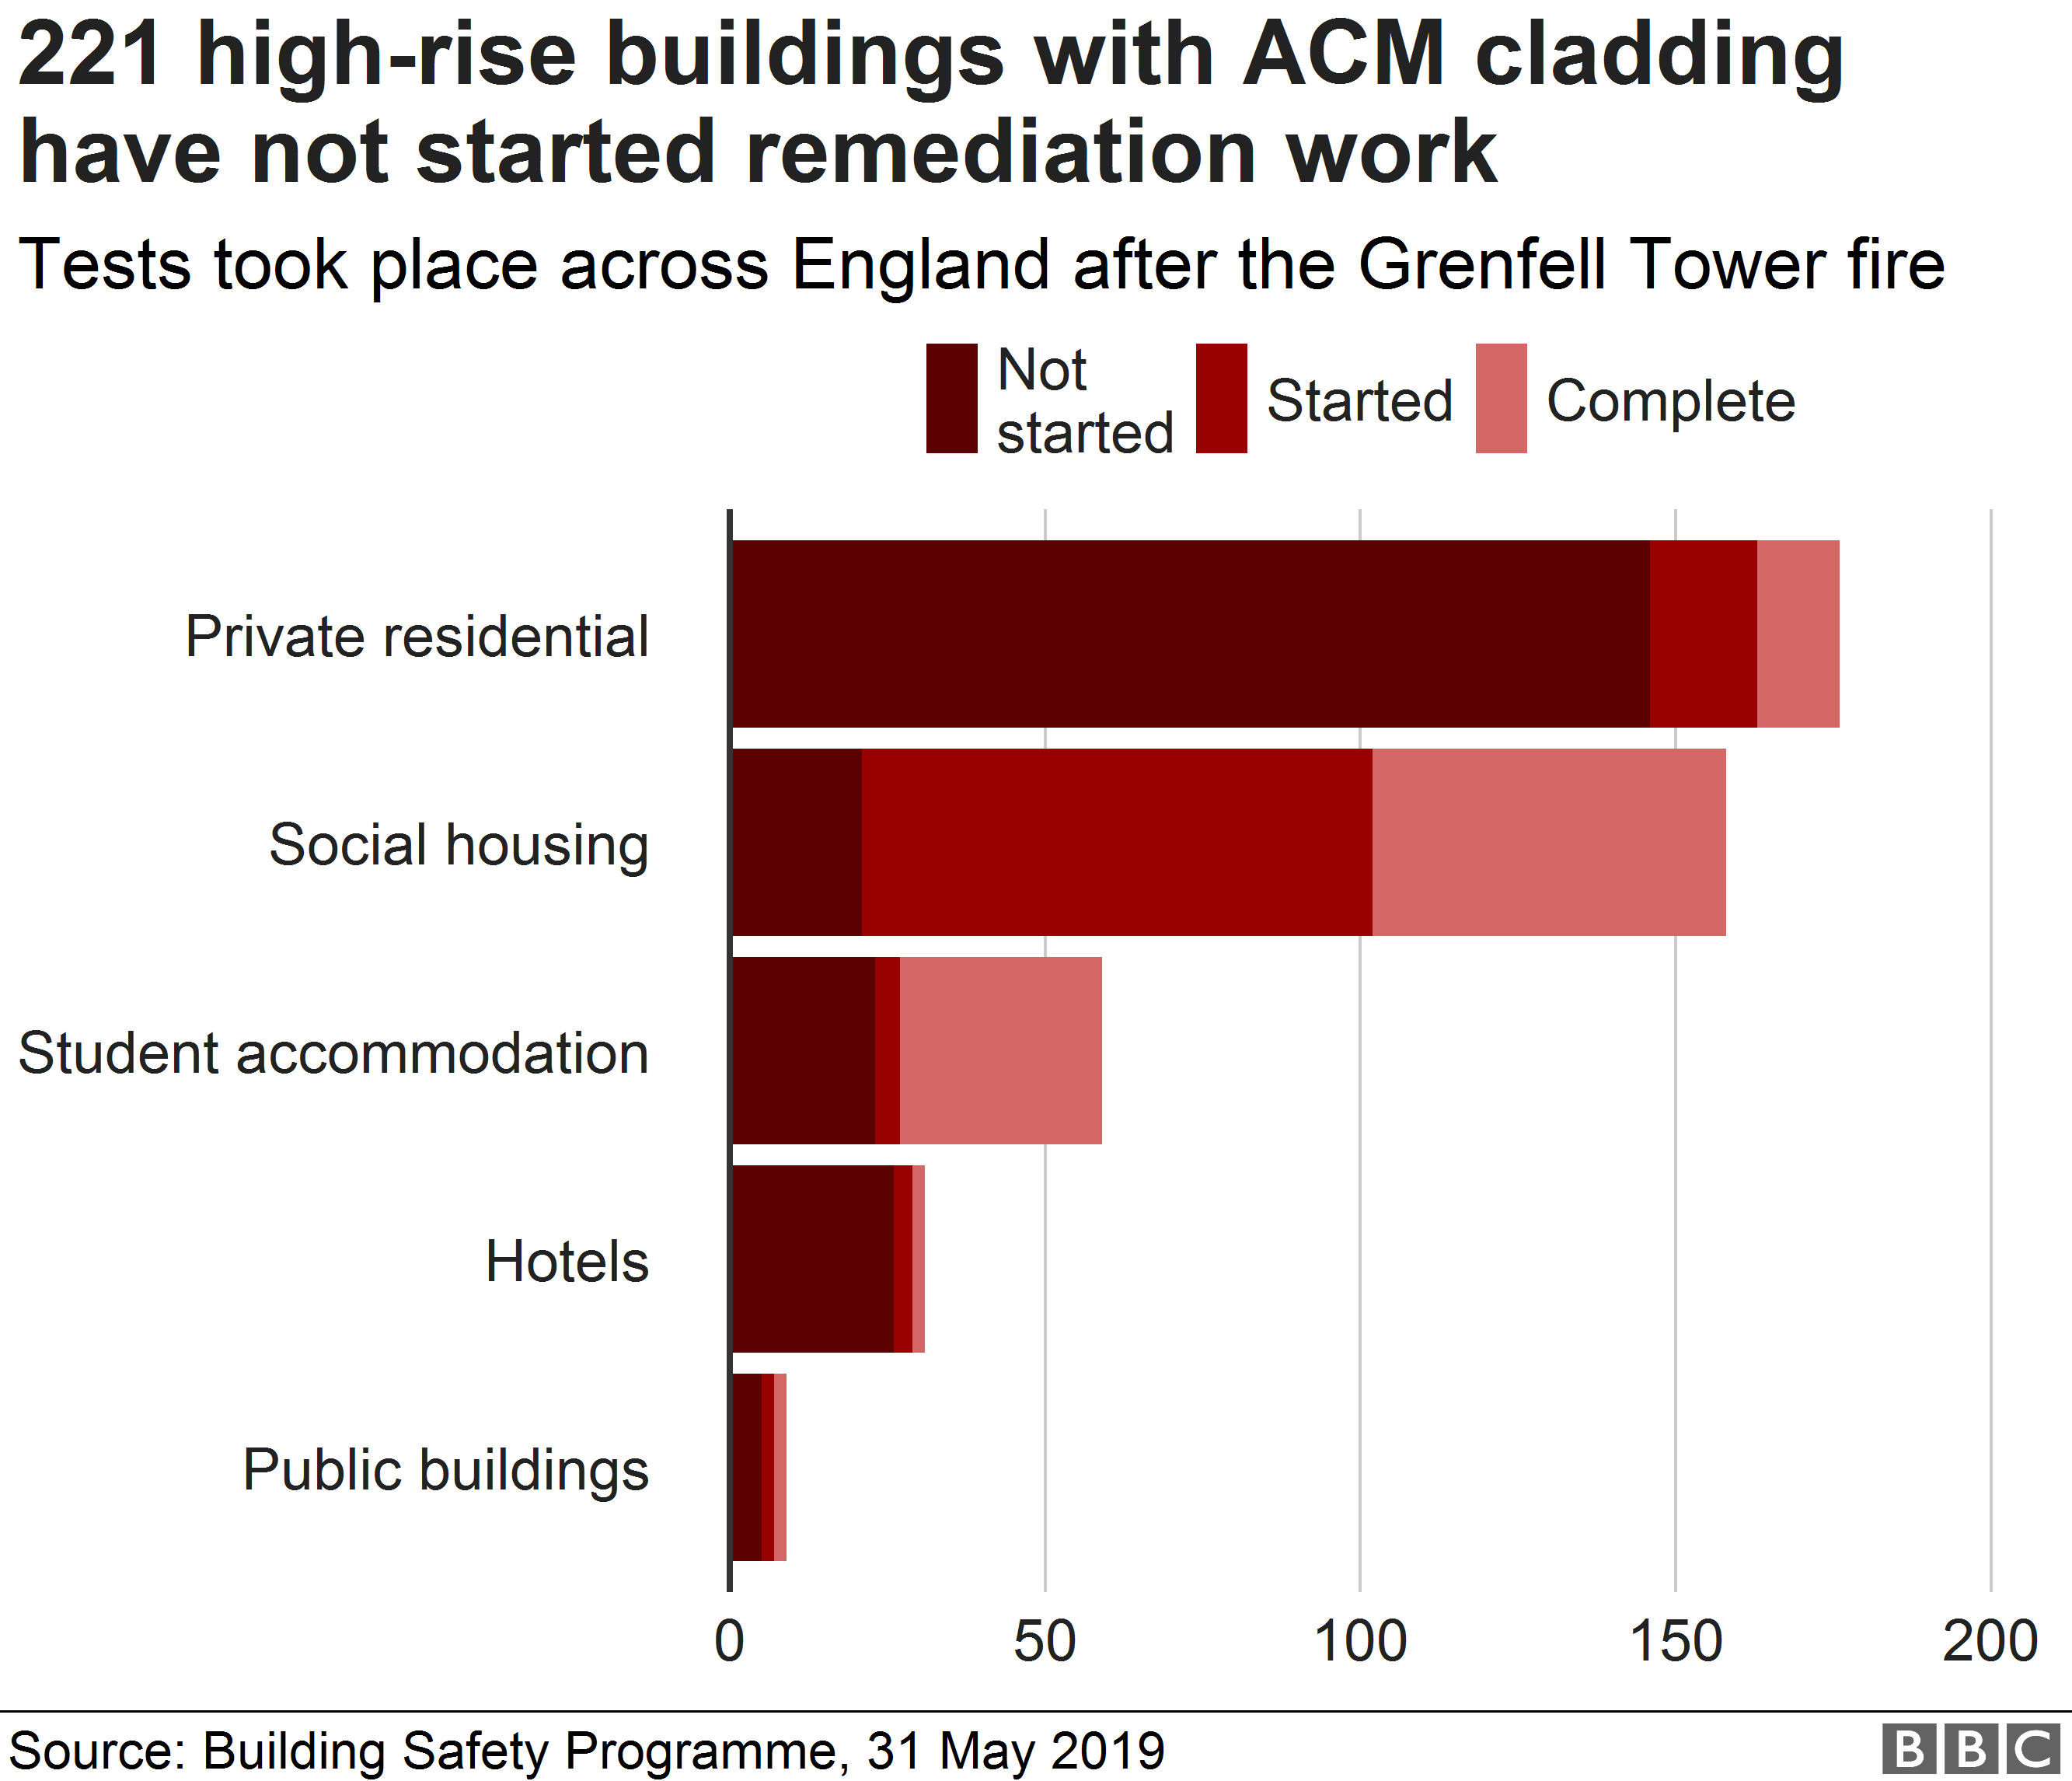 Chart showing the number of high rise buildings with ACM cladding in England